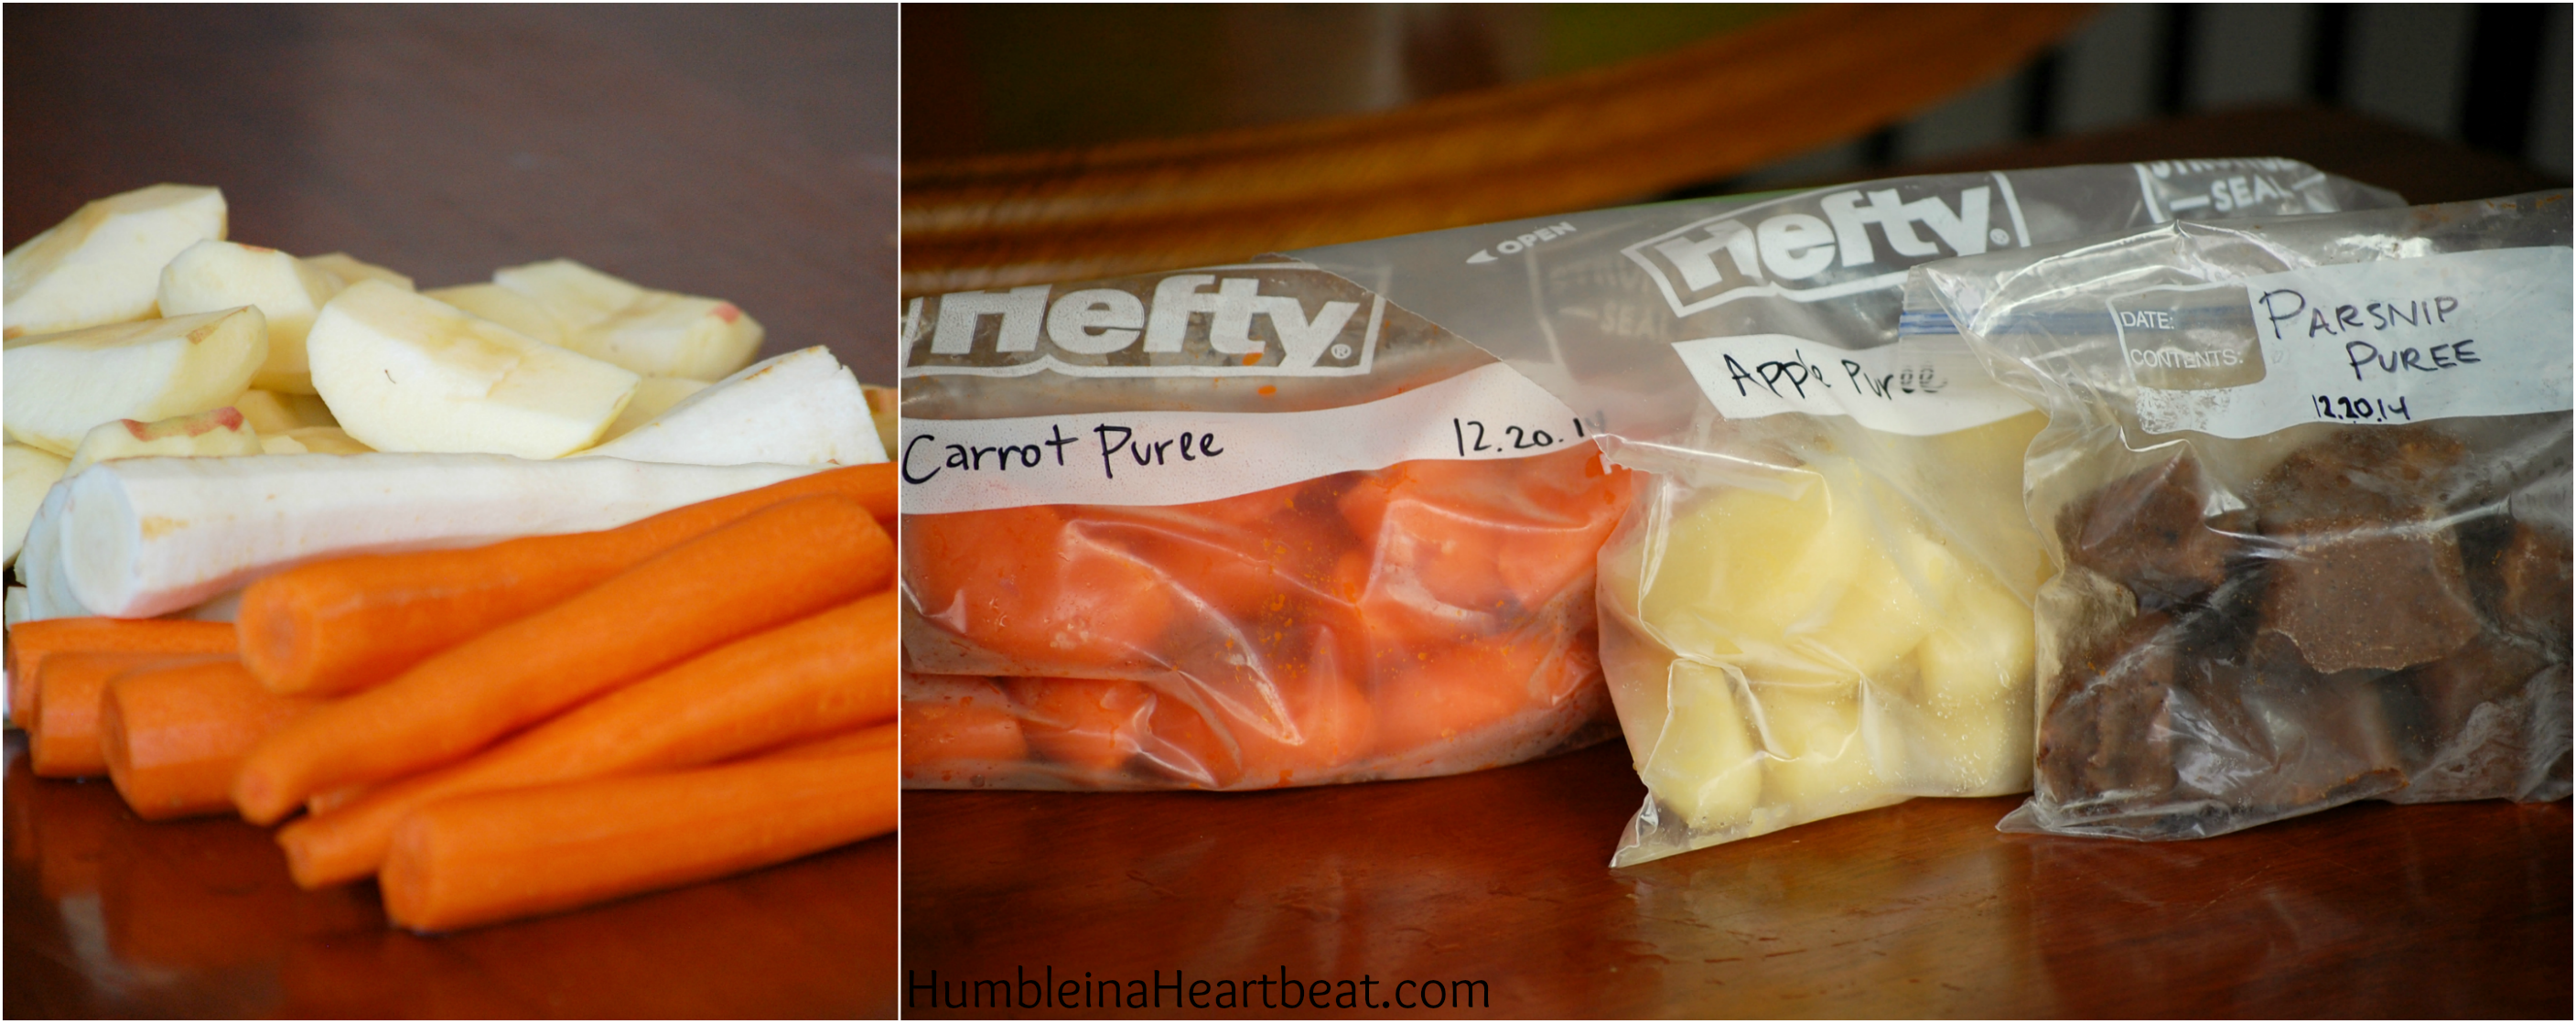 https://feedingourflamingos.com/wp-content/uploads/2014/10/baby-food-freezer-cooking-day-carrots-parsnips-apples-prep-bagged.png